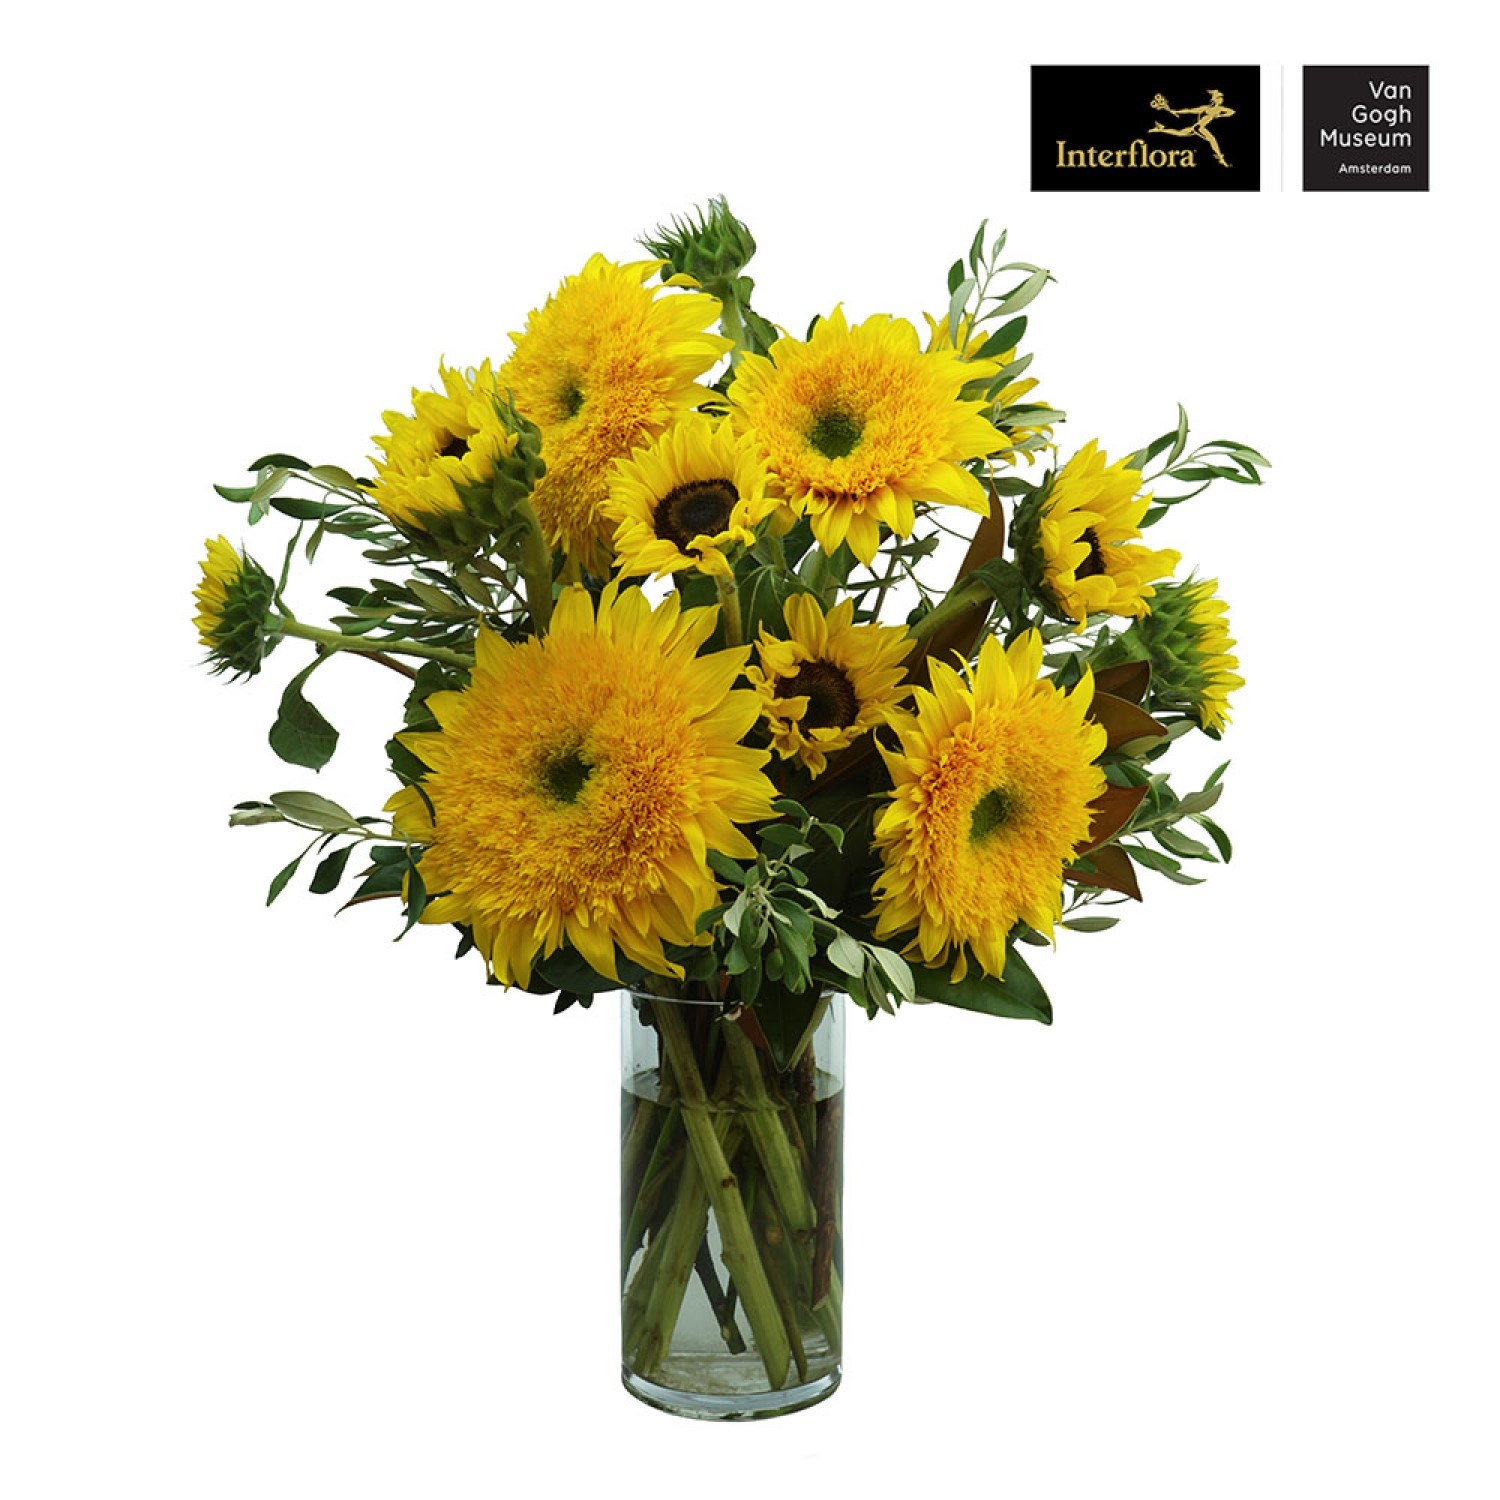 product image for Van Gogh Sunflowers